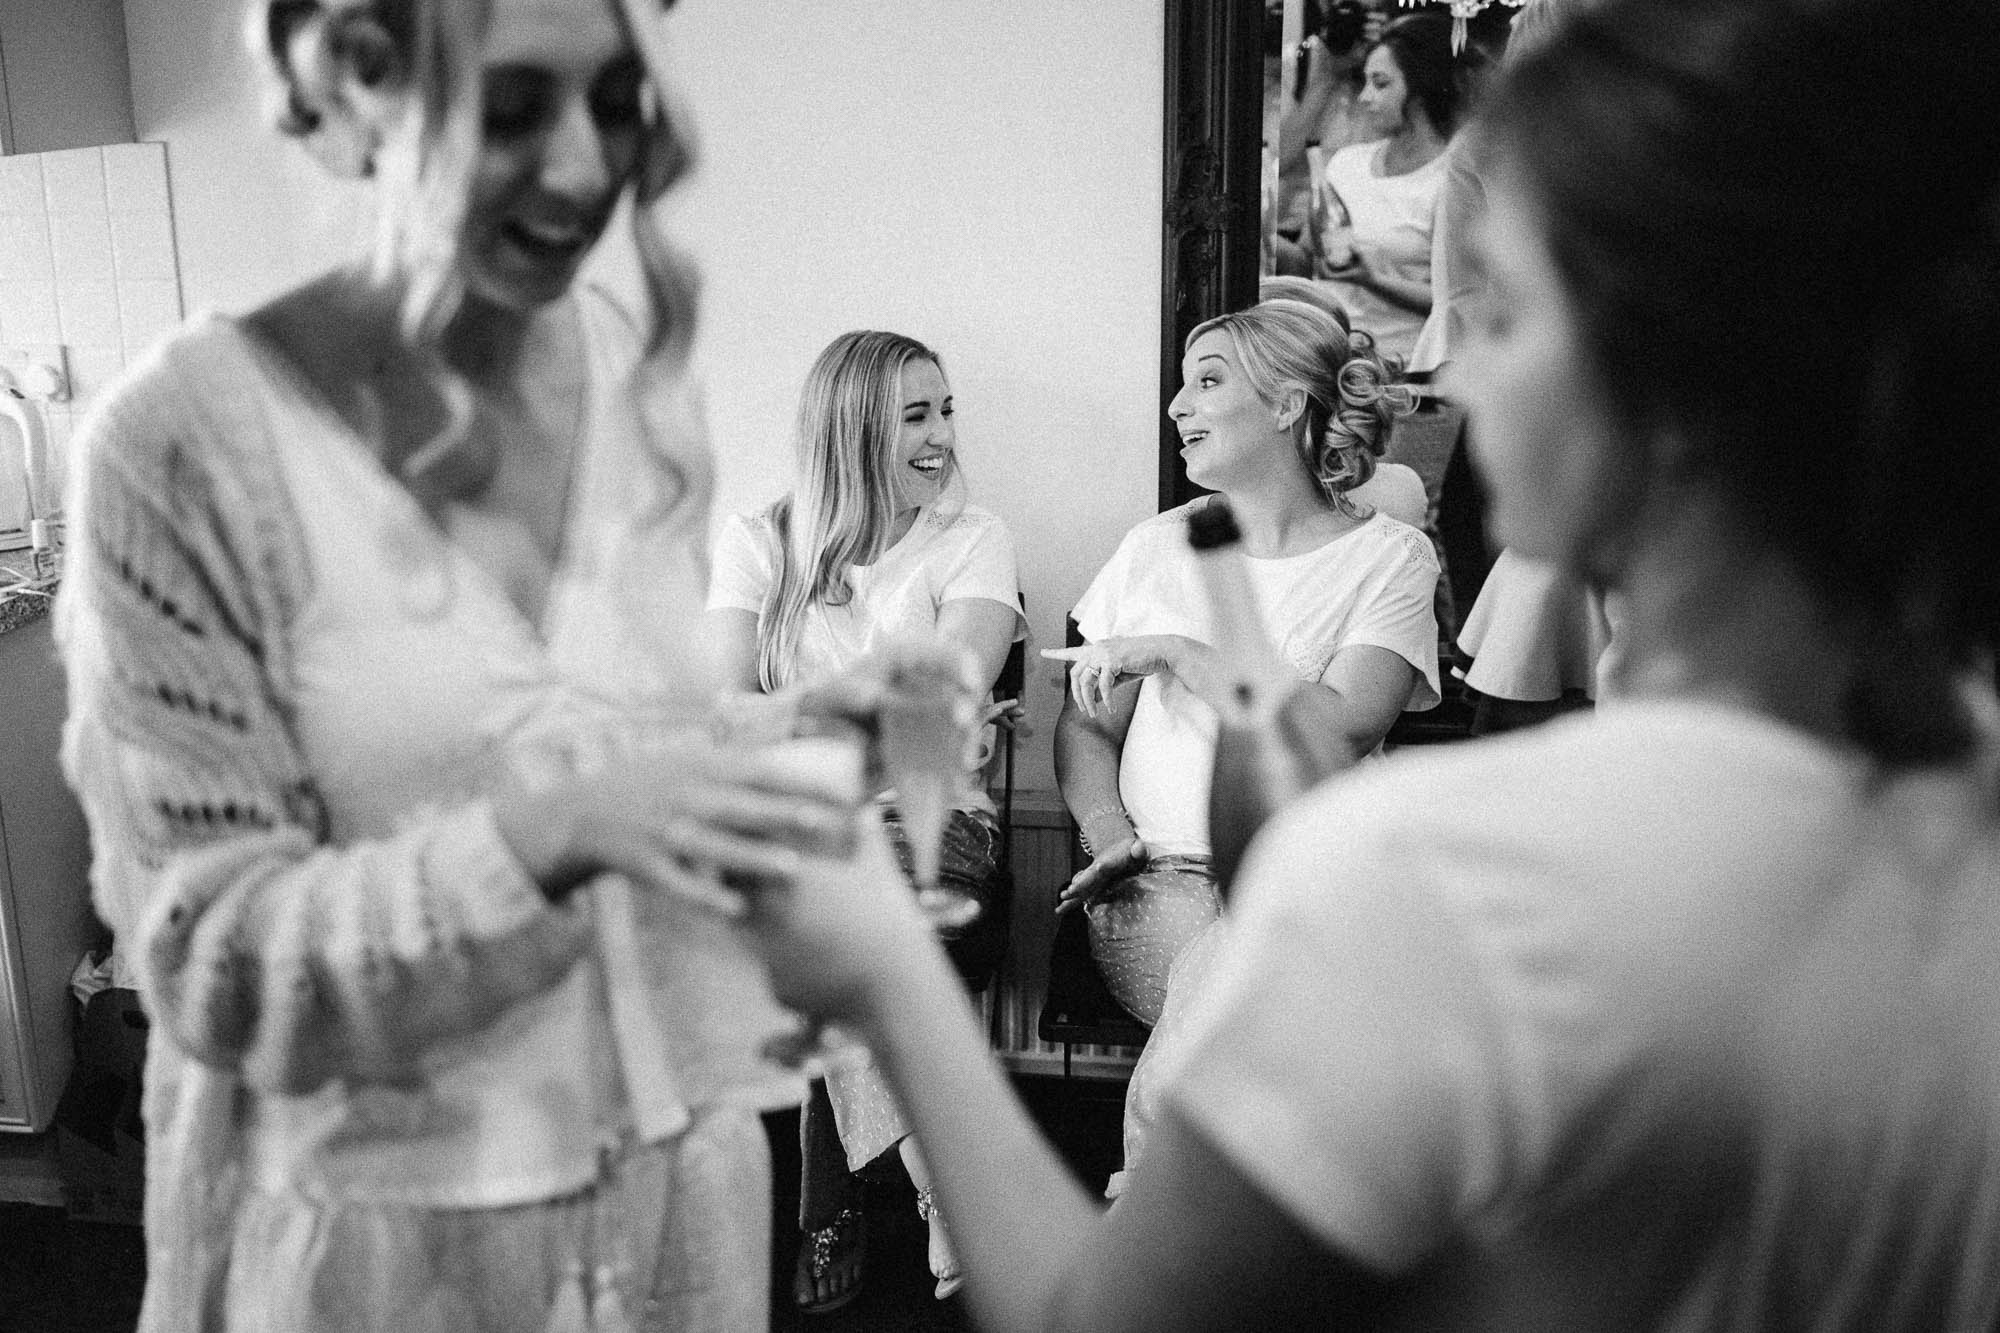 Black and white shot of bridal party preparations